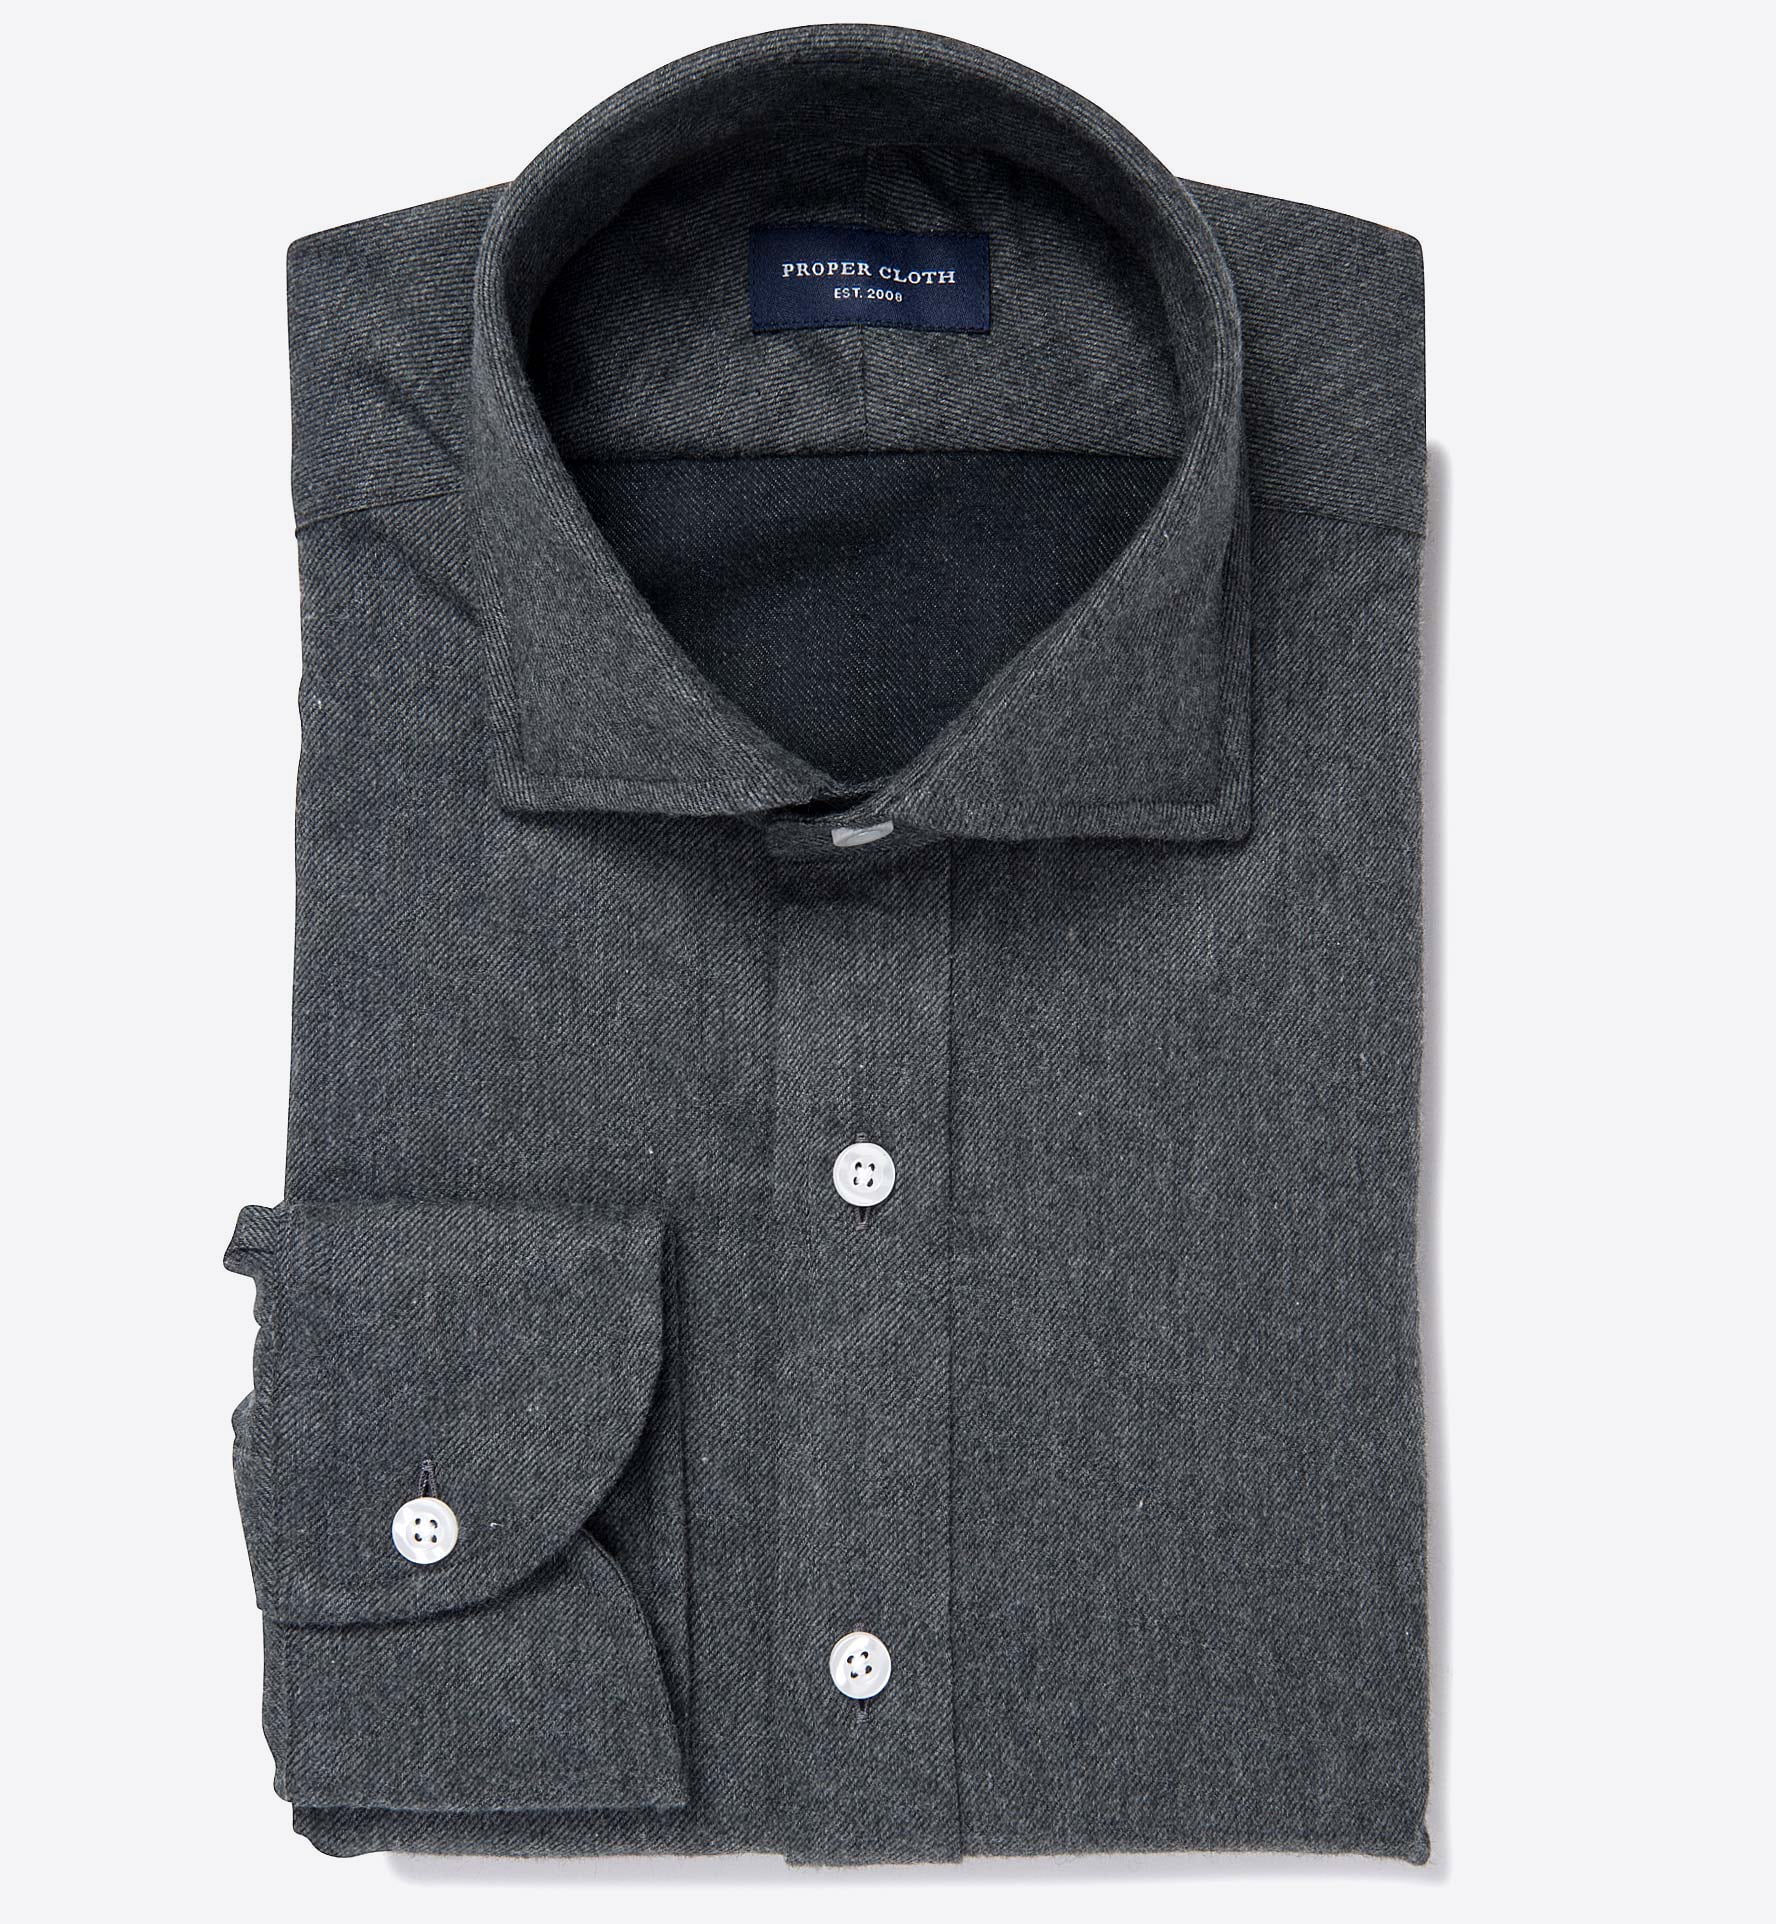 Canclini Charcoal Twill Beacon Flannel Dress Shirt by Proper Cloth